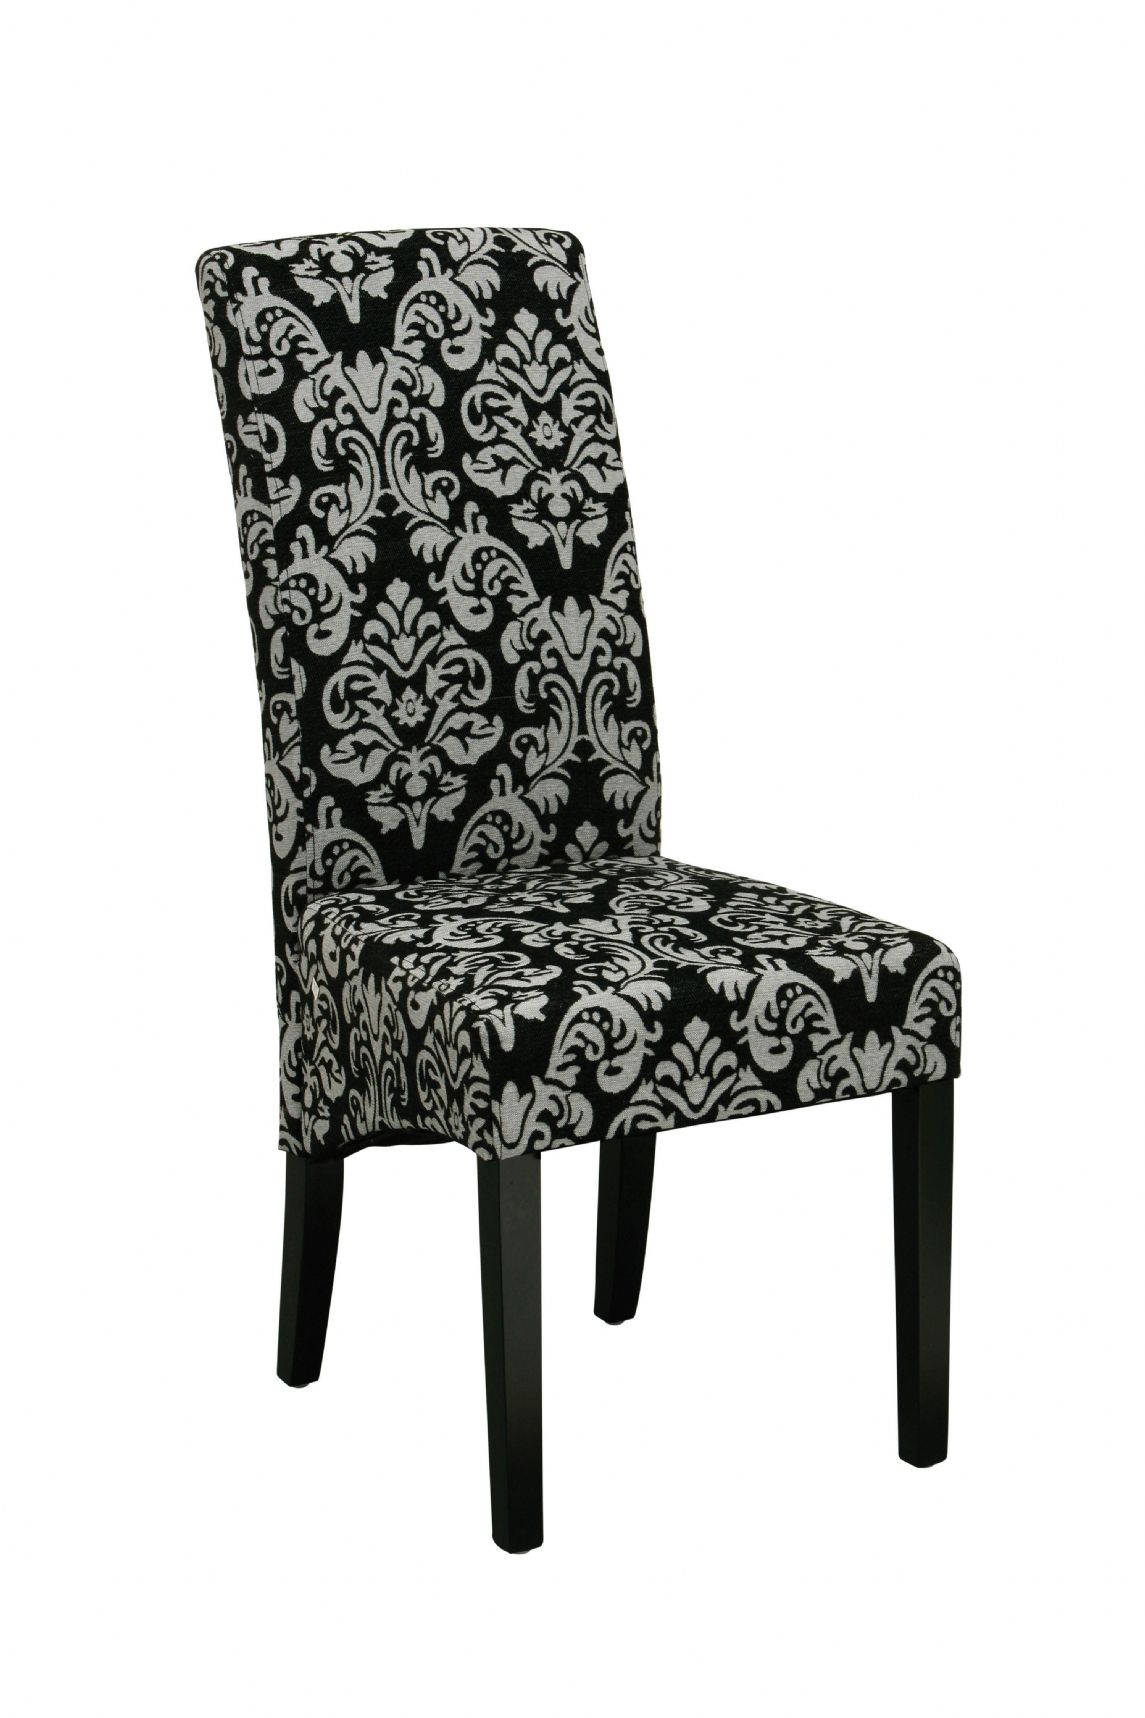 The Best 5 Fabric Chairs Fads, Fabric For Dining Room Chairs Uk